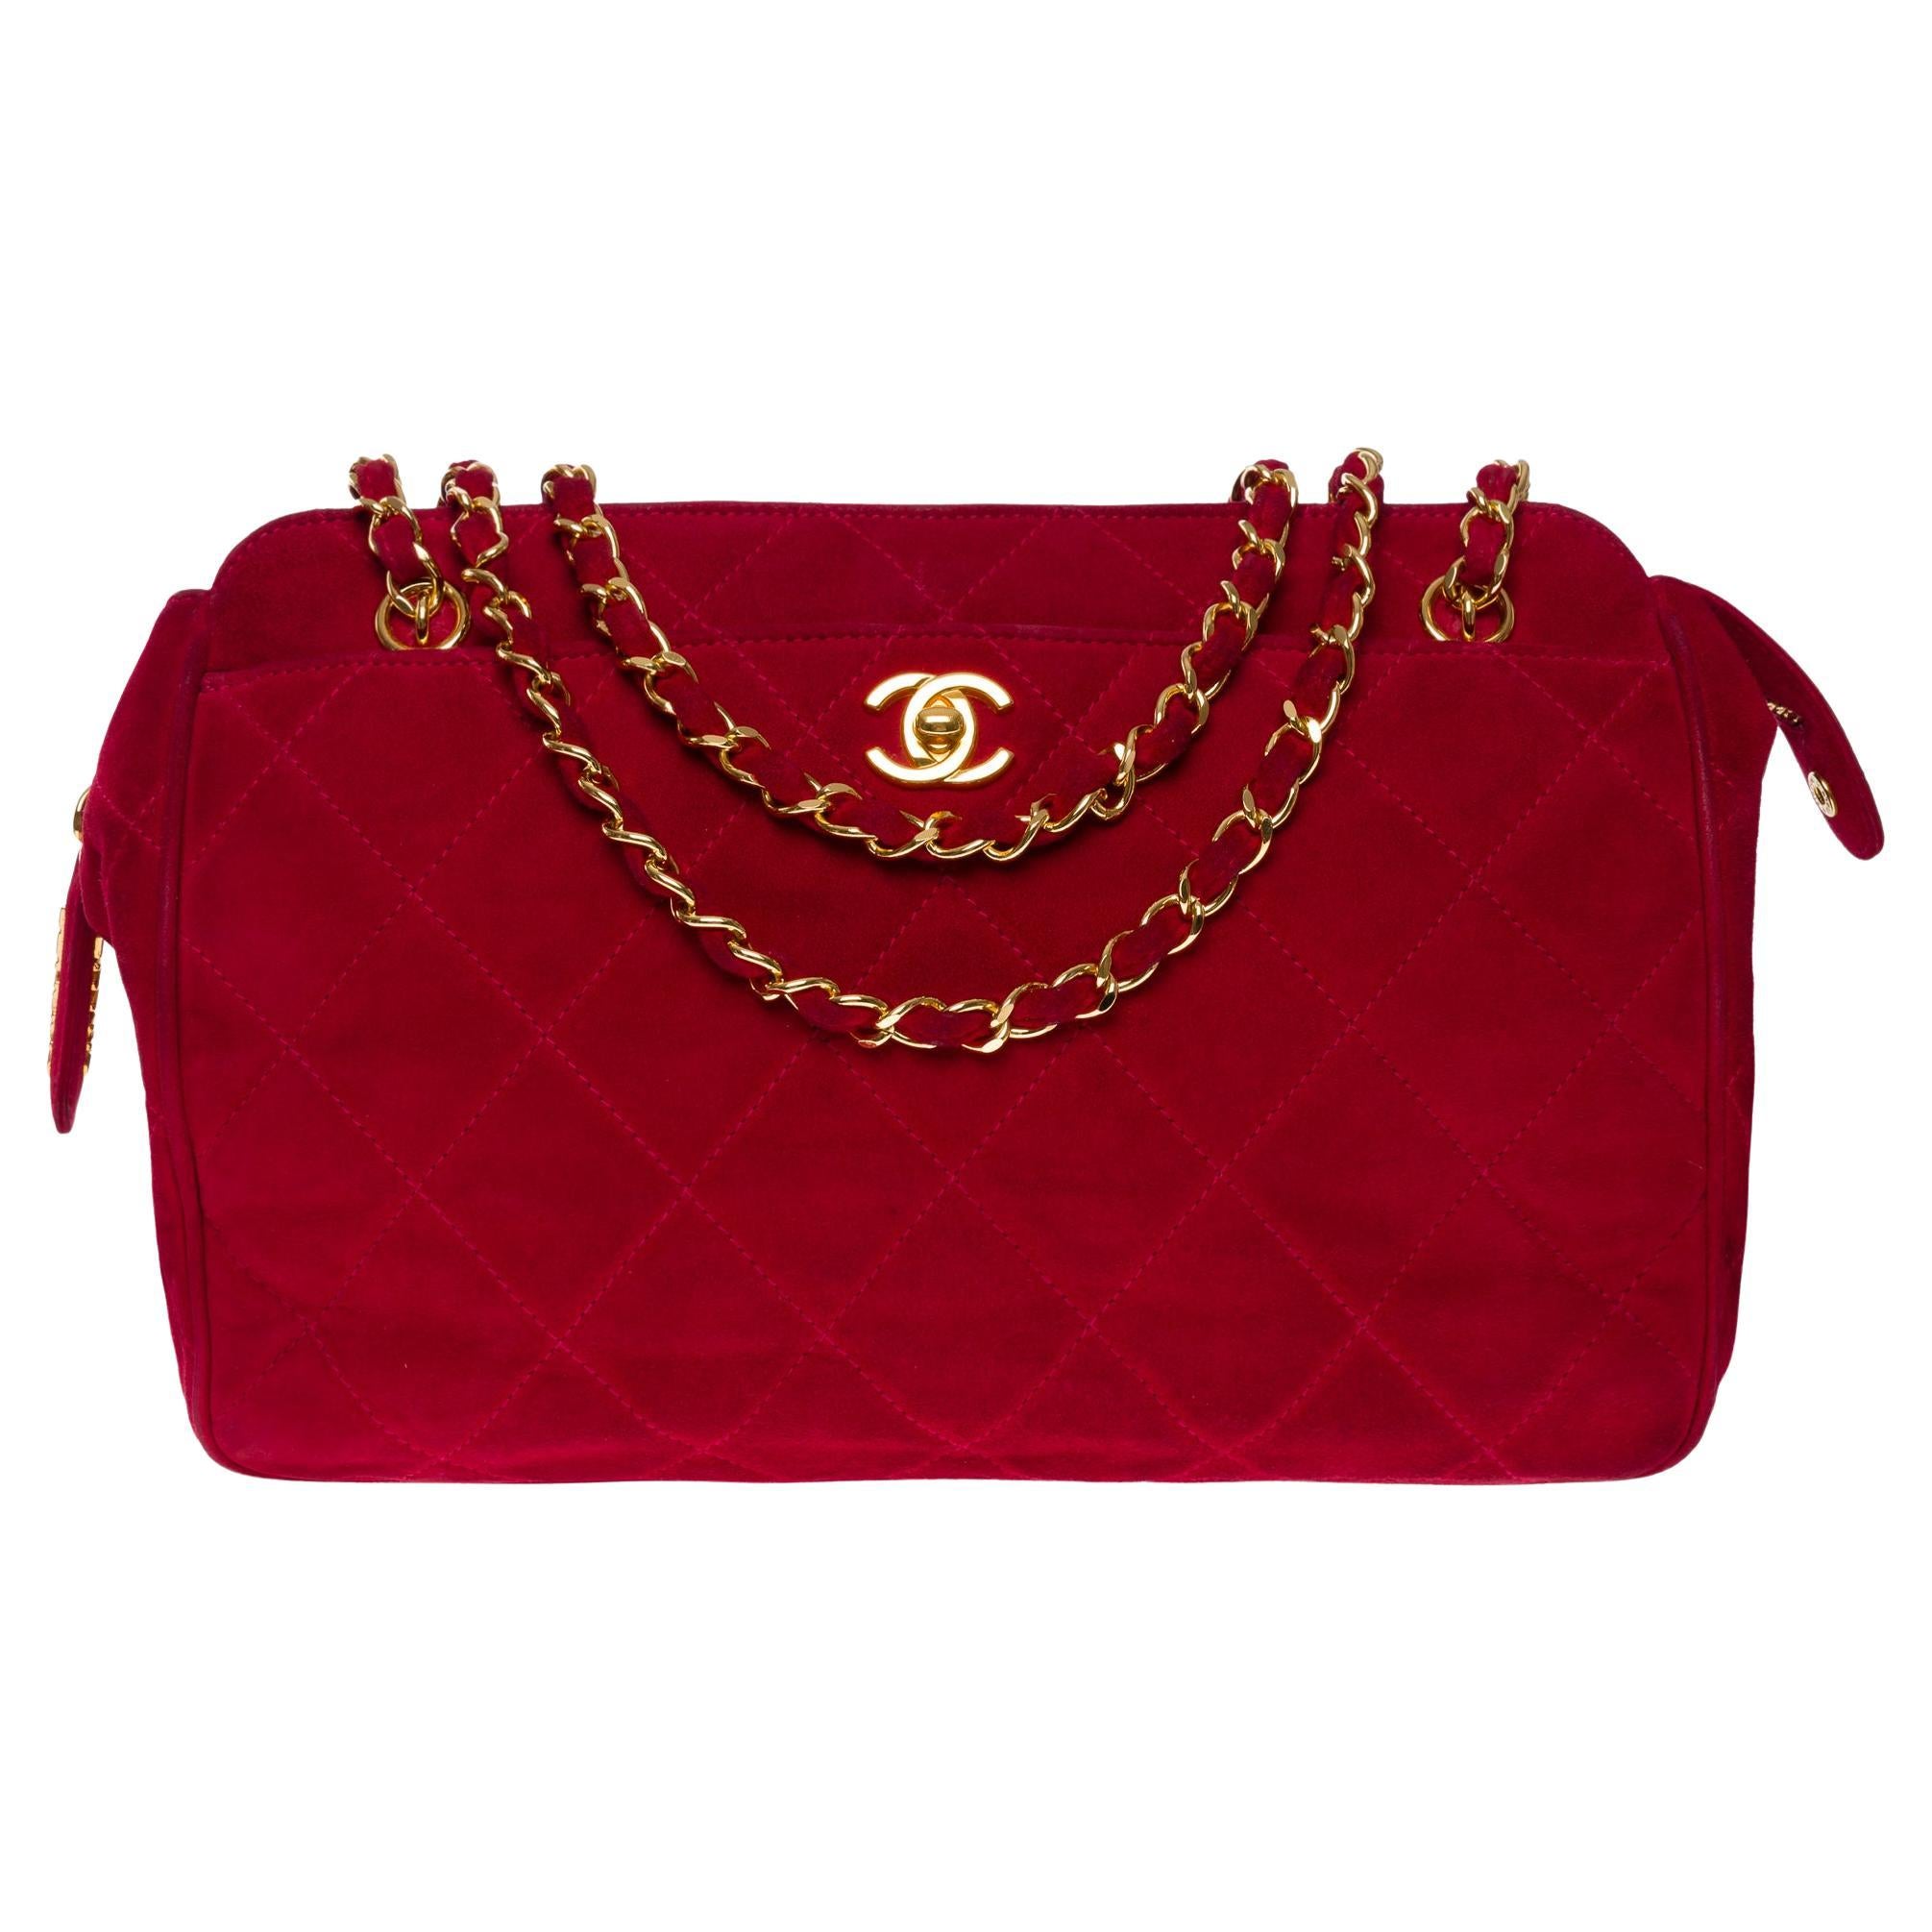 Gorgeous Chanel Camera shoulder bag in red suede, GHW